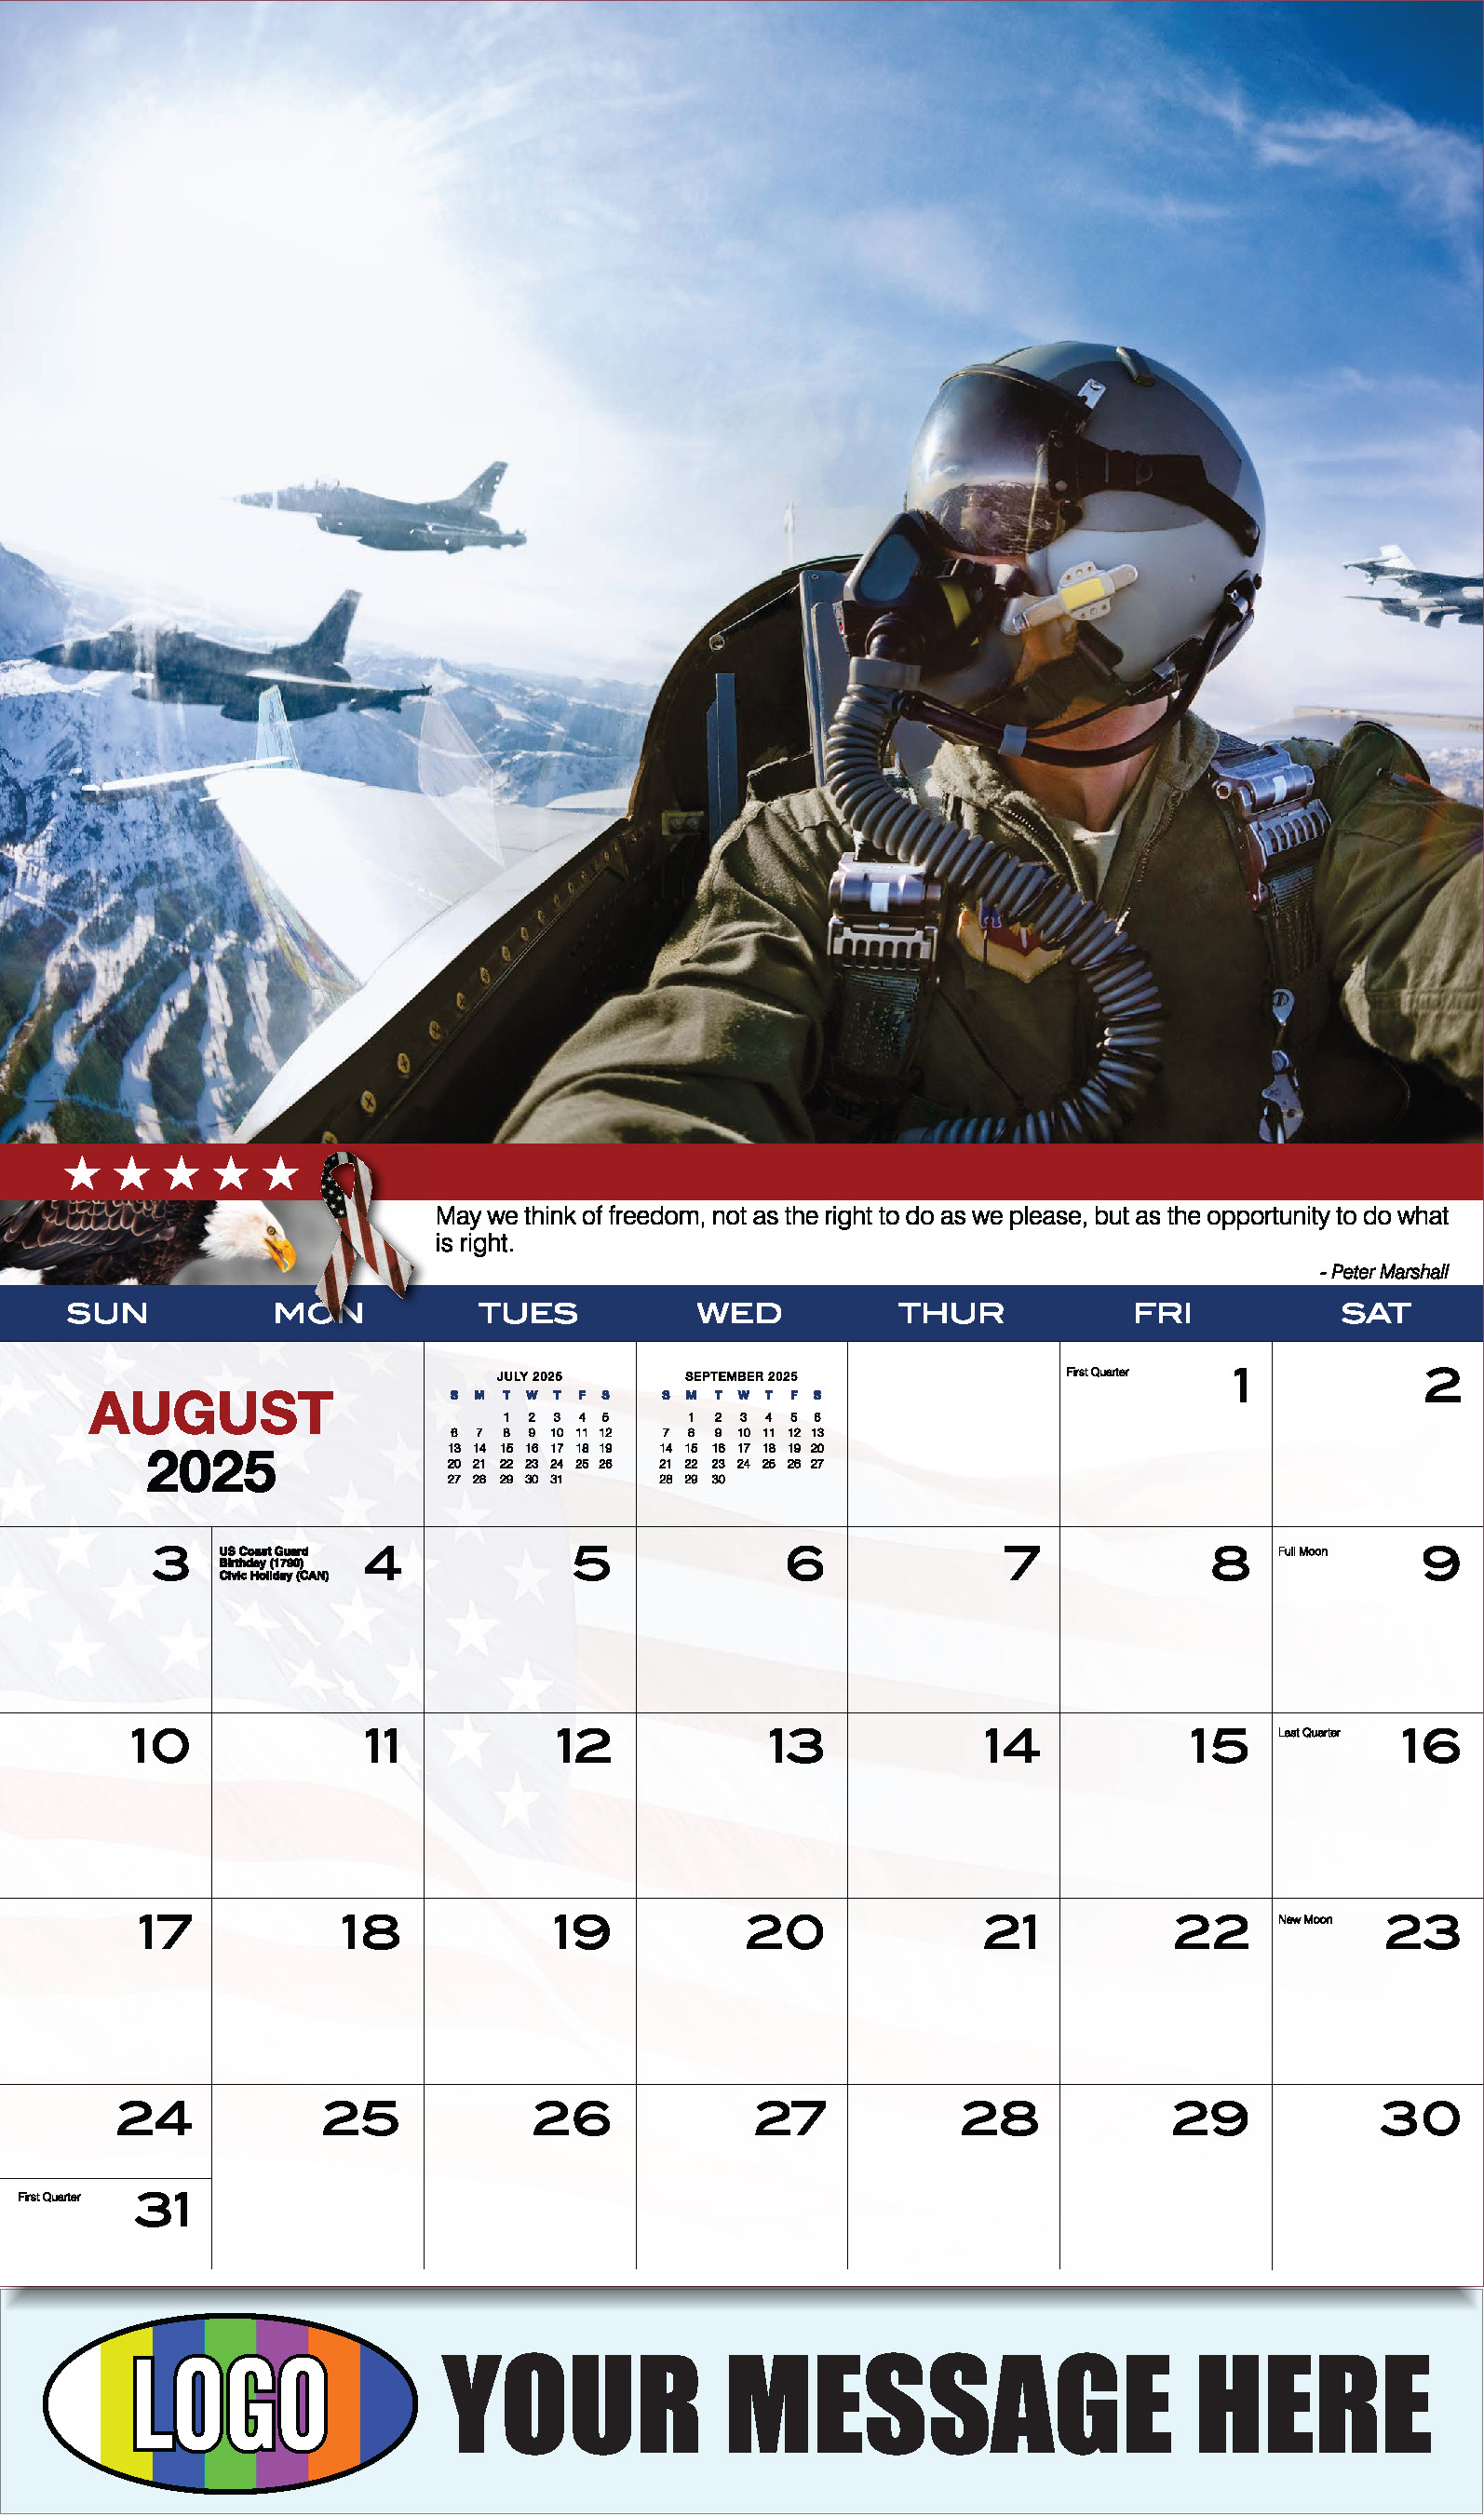 Home of the Brave 2025 USA Armed Forces Business Promo Calendar - August